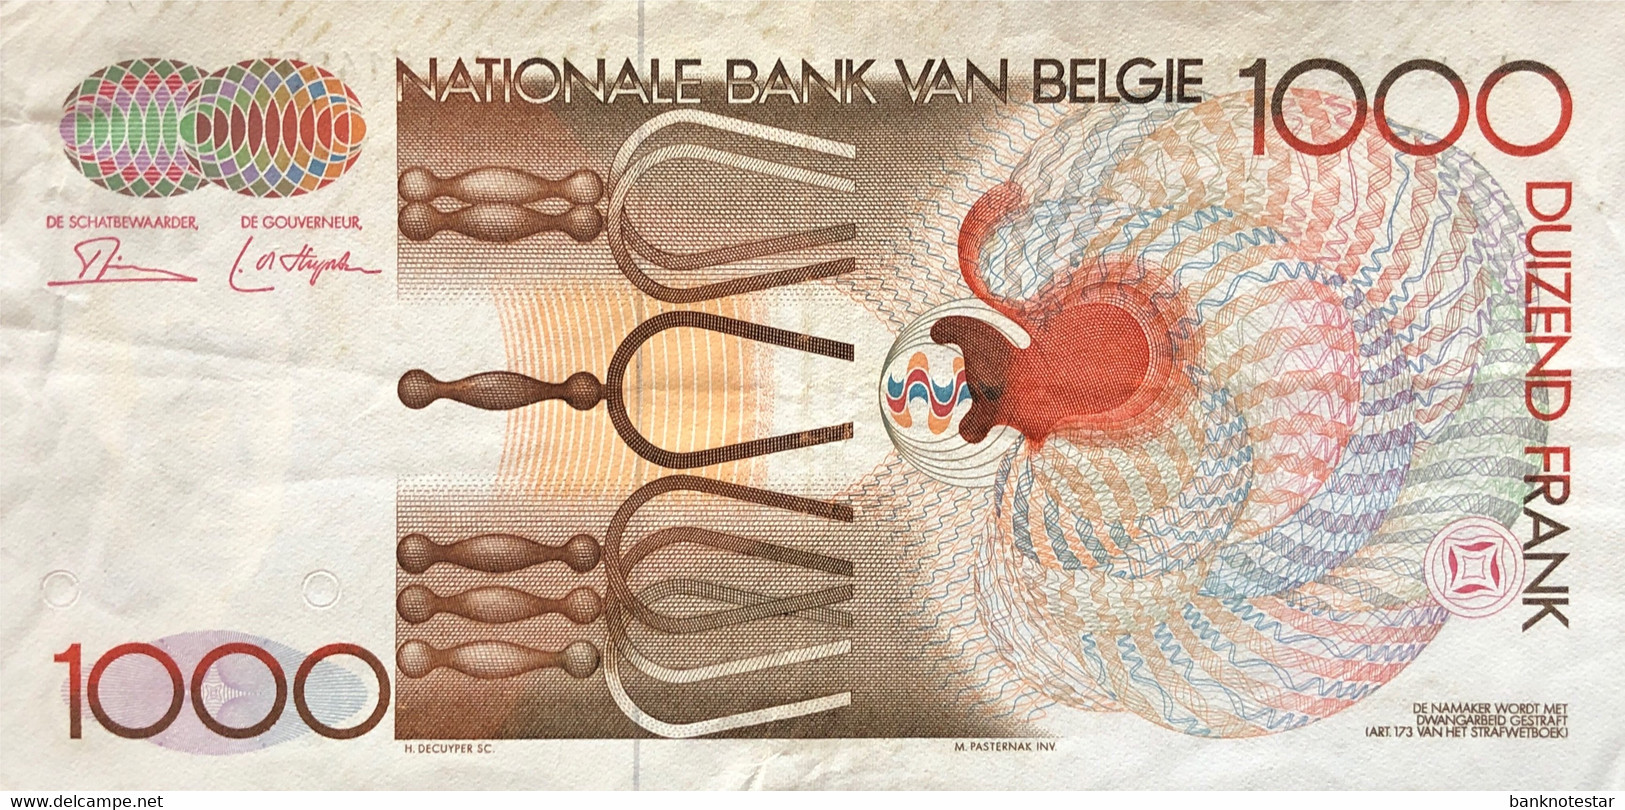 Belgium 1.000 Francs, P-144 (1980) - Very Fine ++ - Signature 3+10 - First Issue! - 1000 Frank